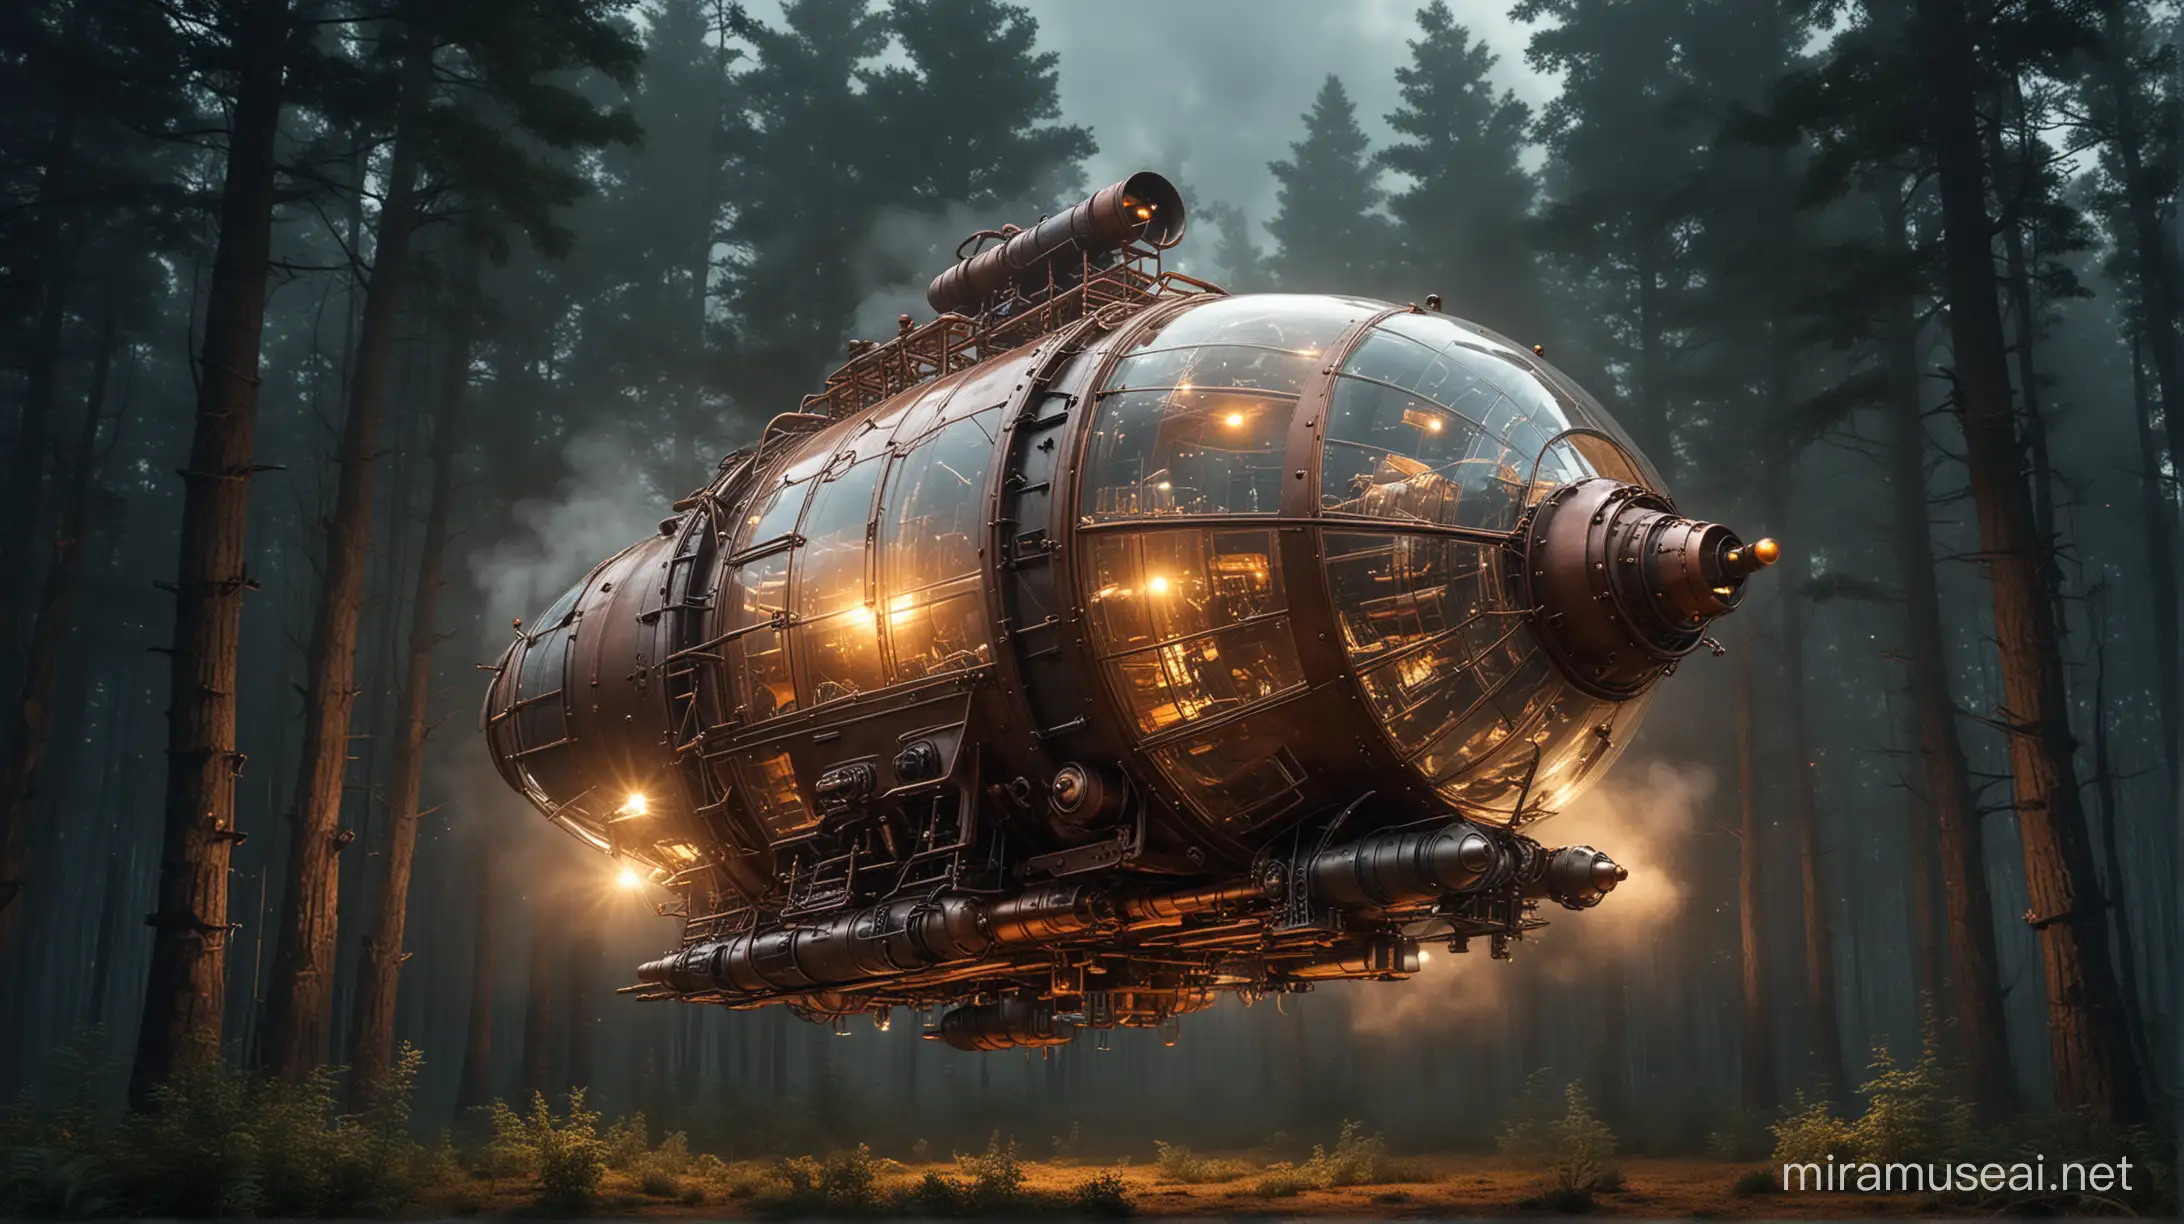 very big flying steampunk capsule made of glass and copper, flies over the forest, the capsule has large steam engine and big position lights, night, all lights are on, much steam